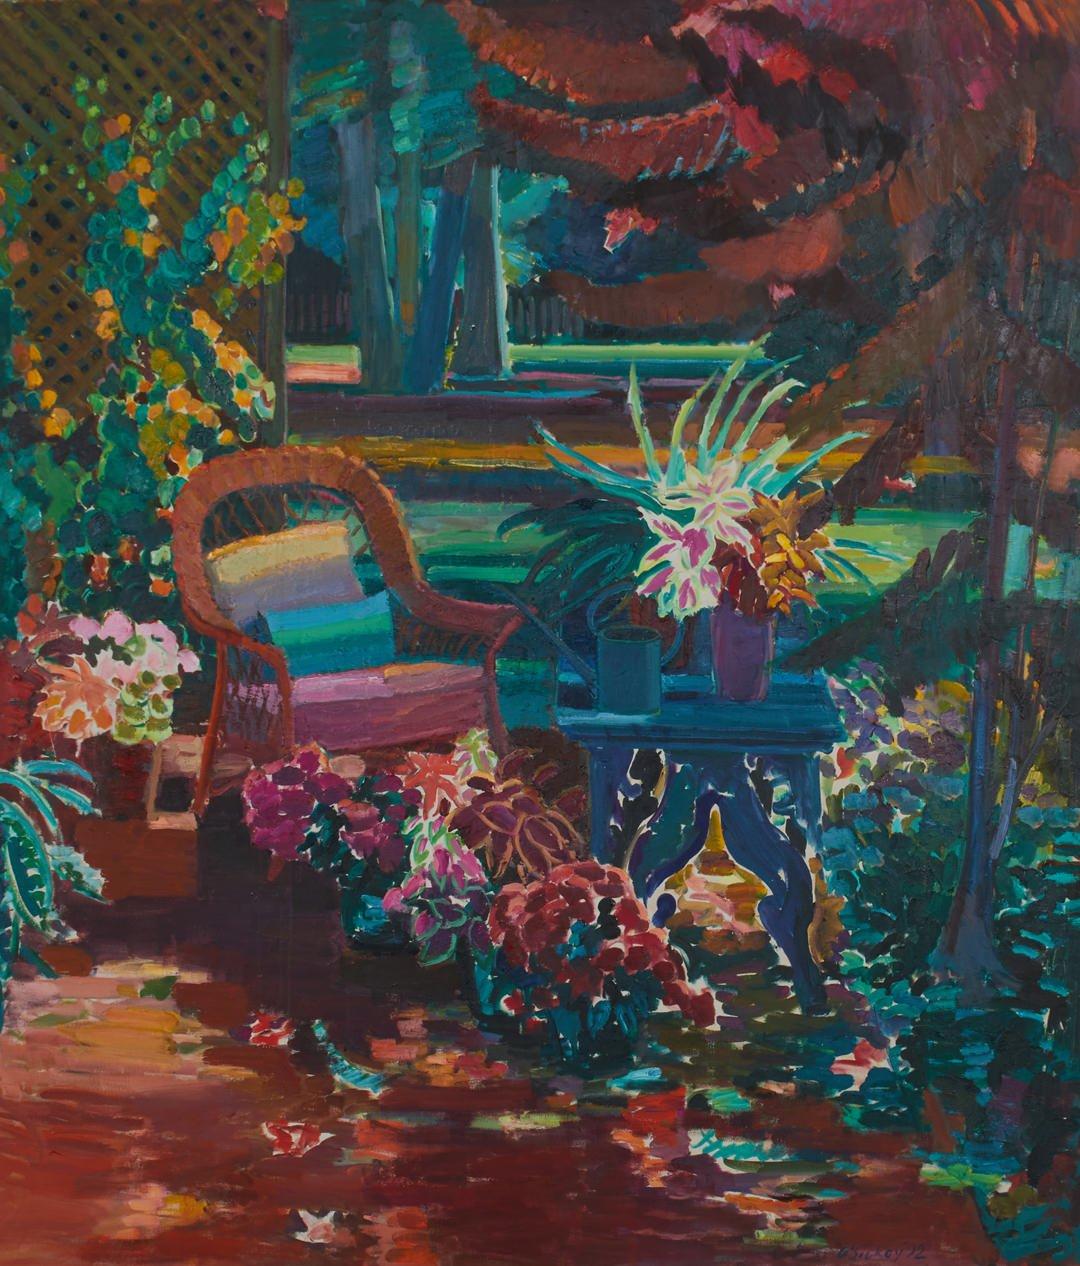 Joseph O'Sickey Still-Life Painting - October Terrace, Colorful Landscape Still Life with Trees, Flowers